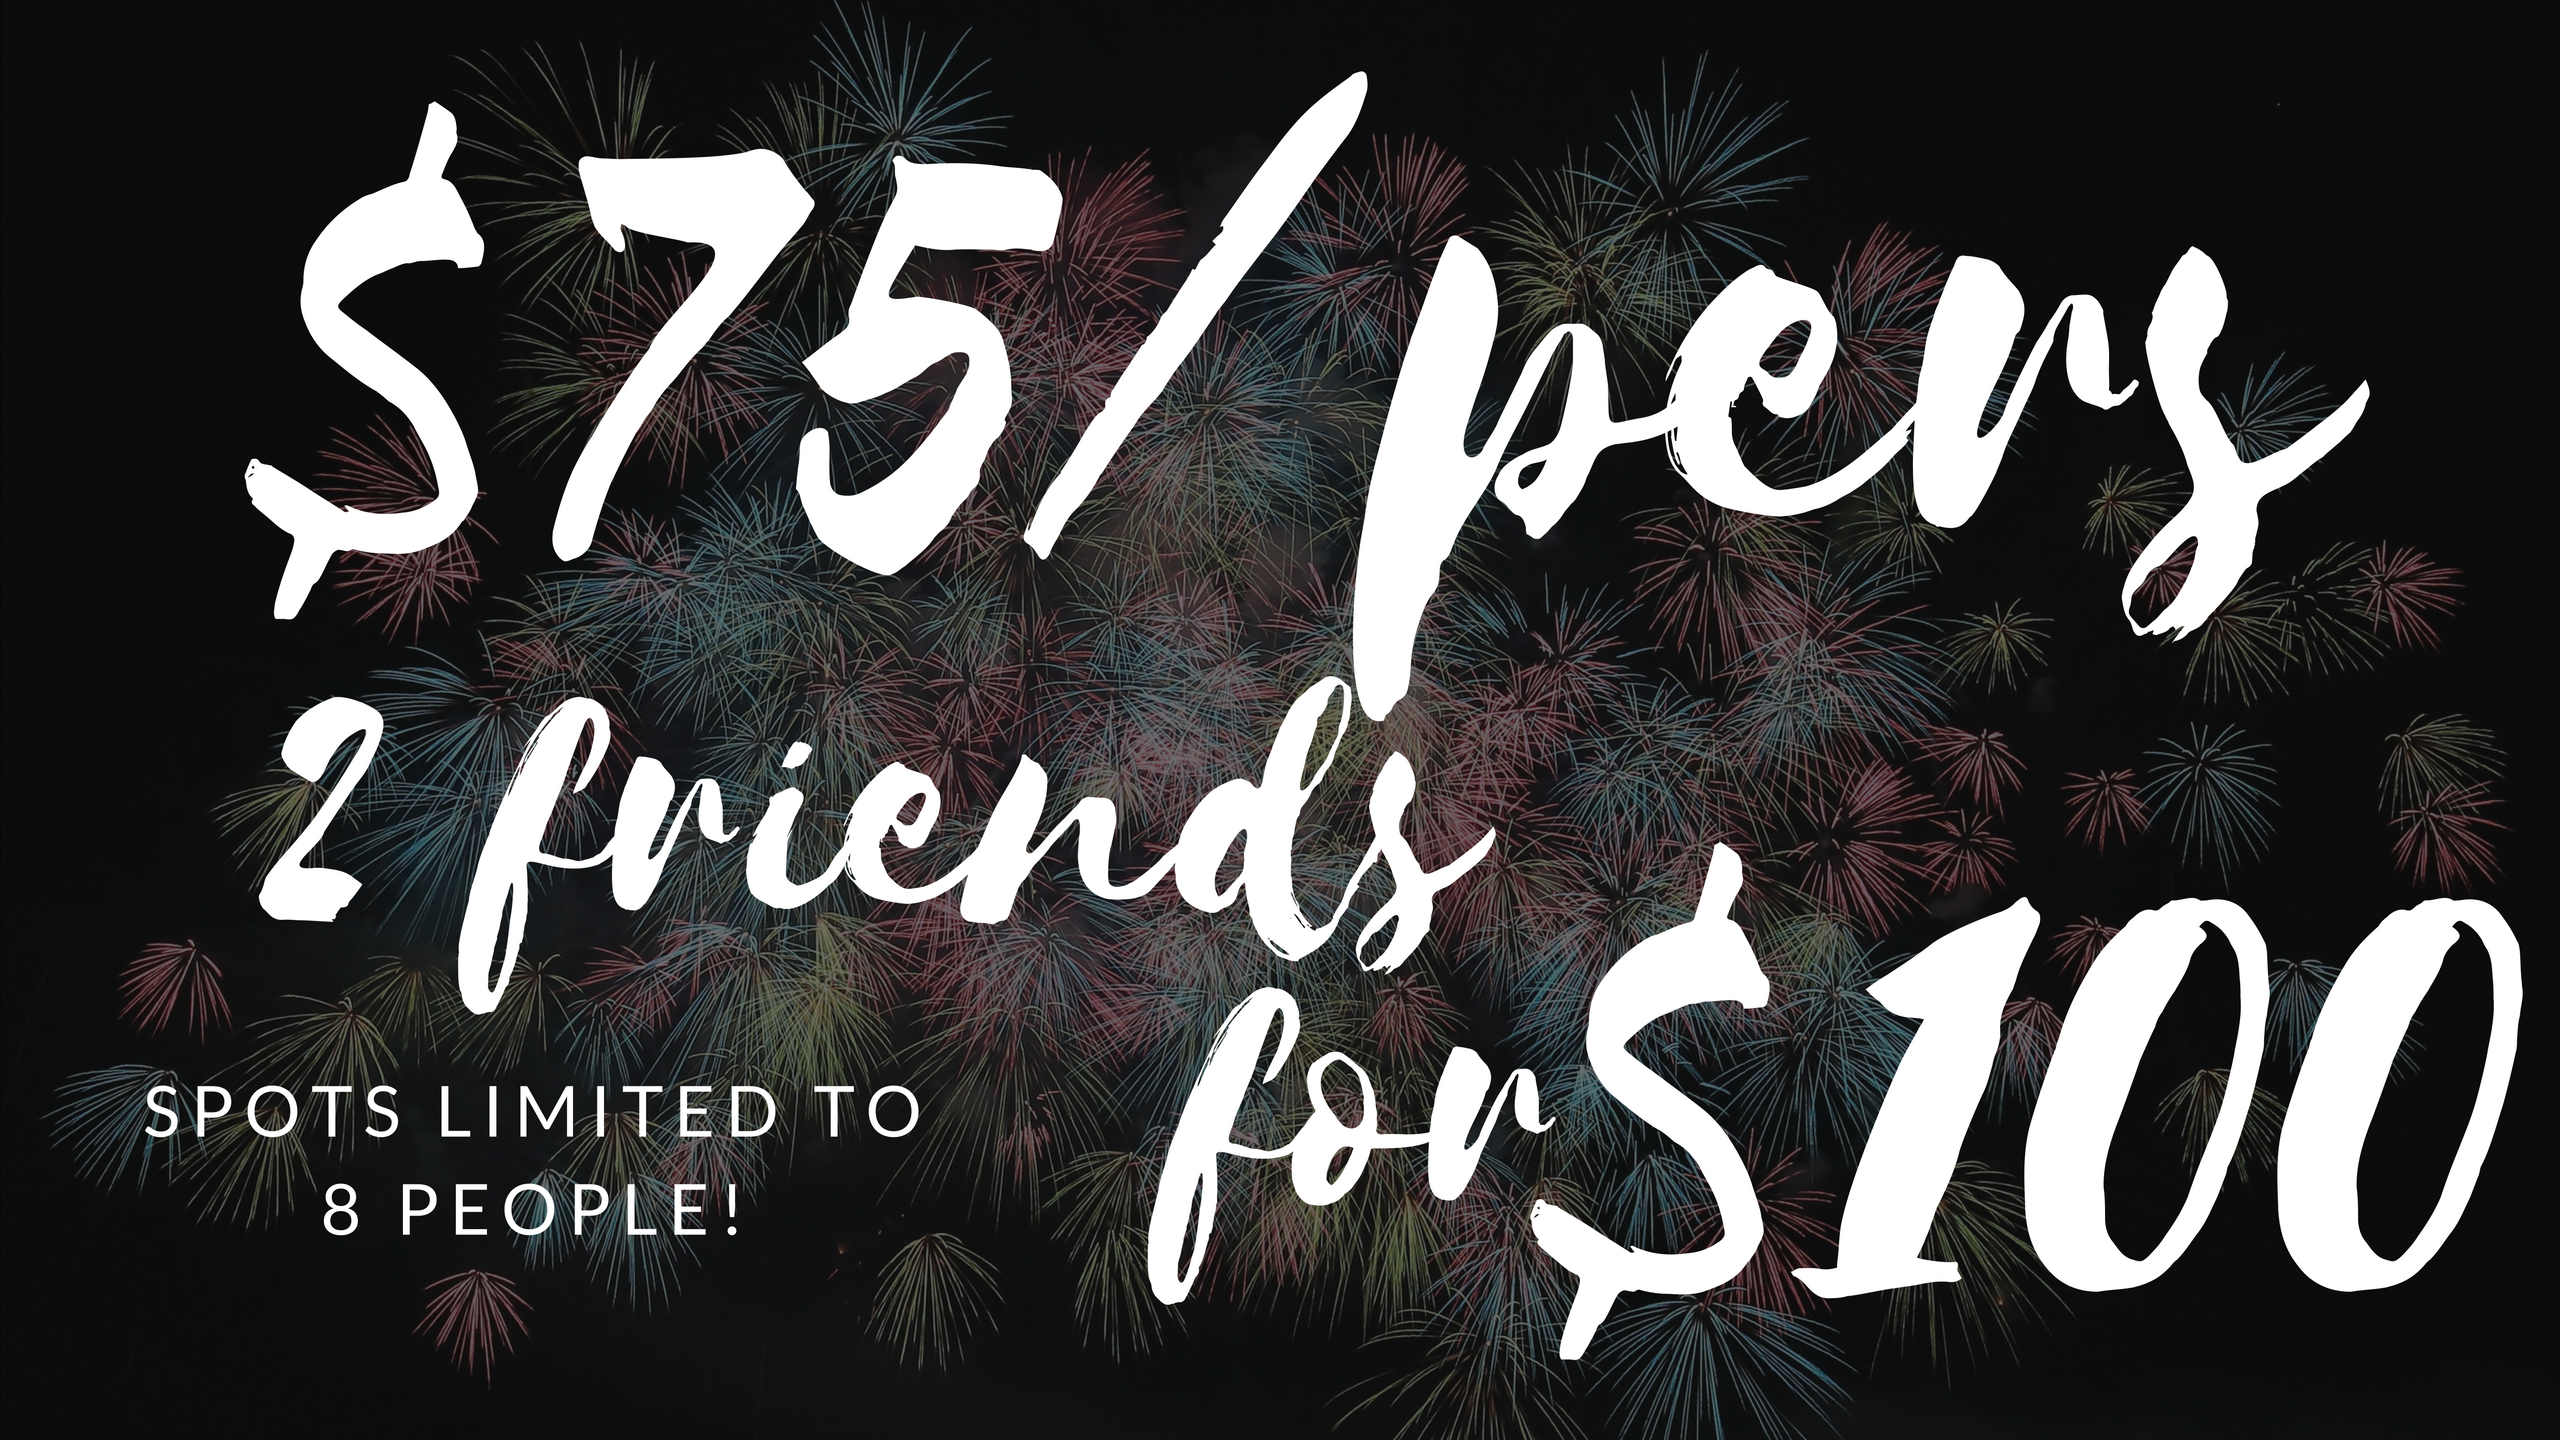 new year's eve resolutions - $75 per person - $100 with a friend